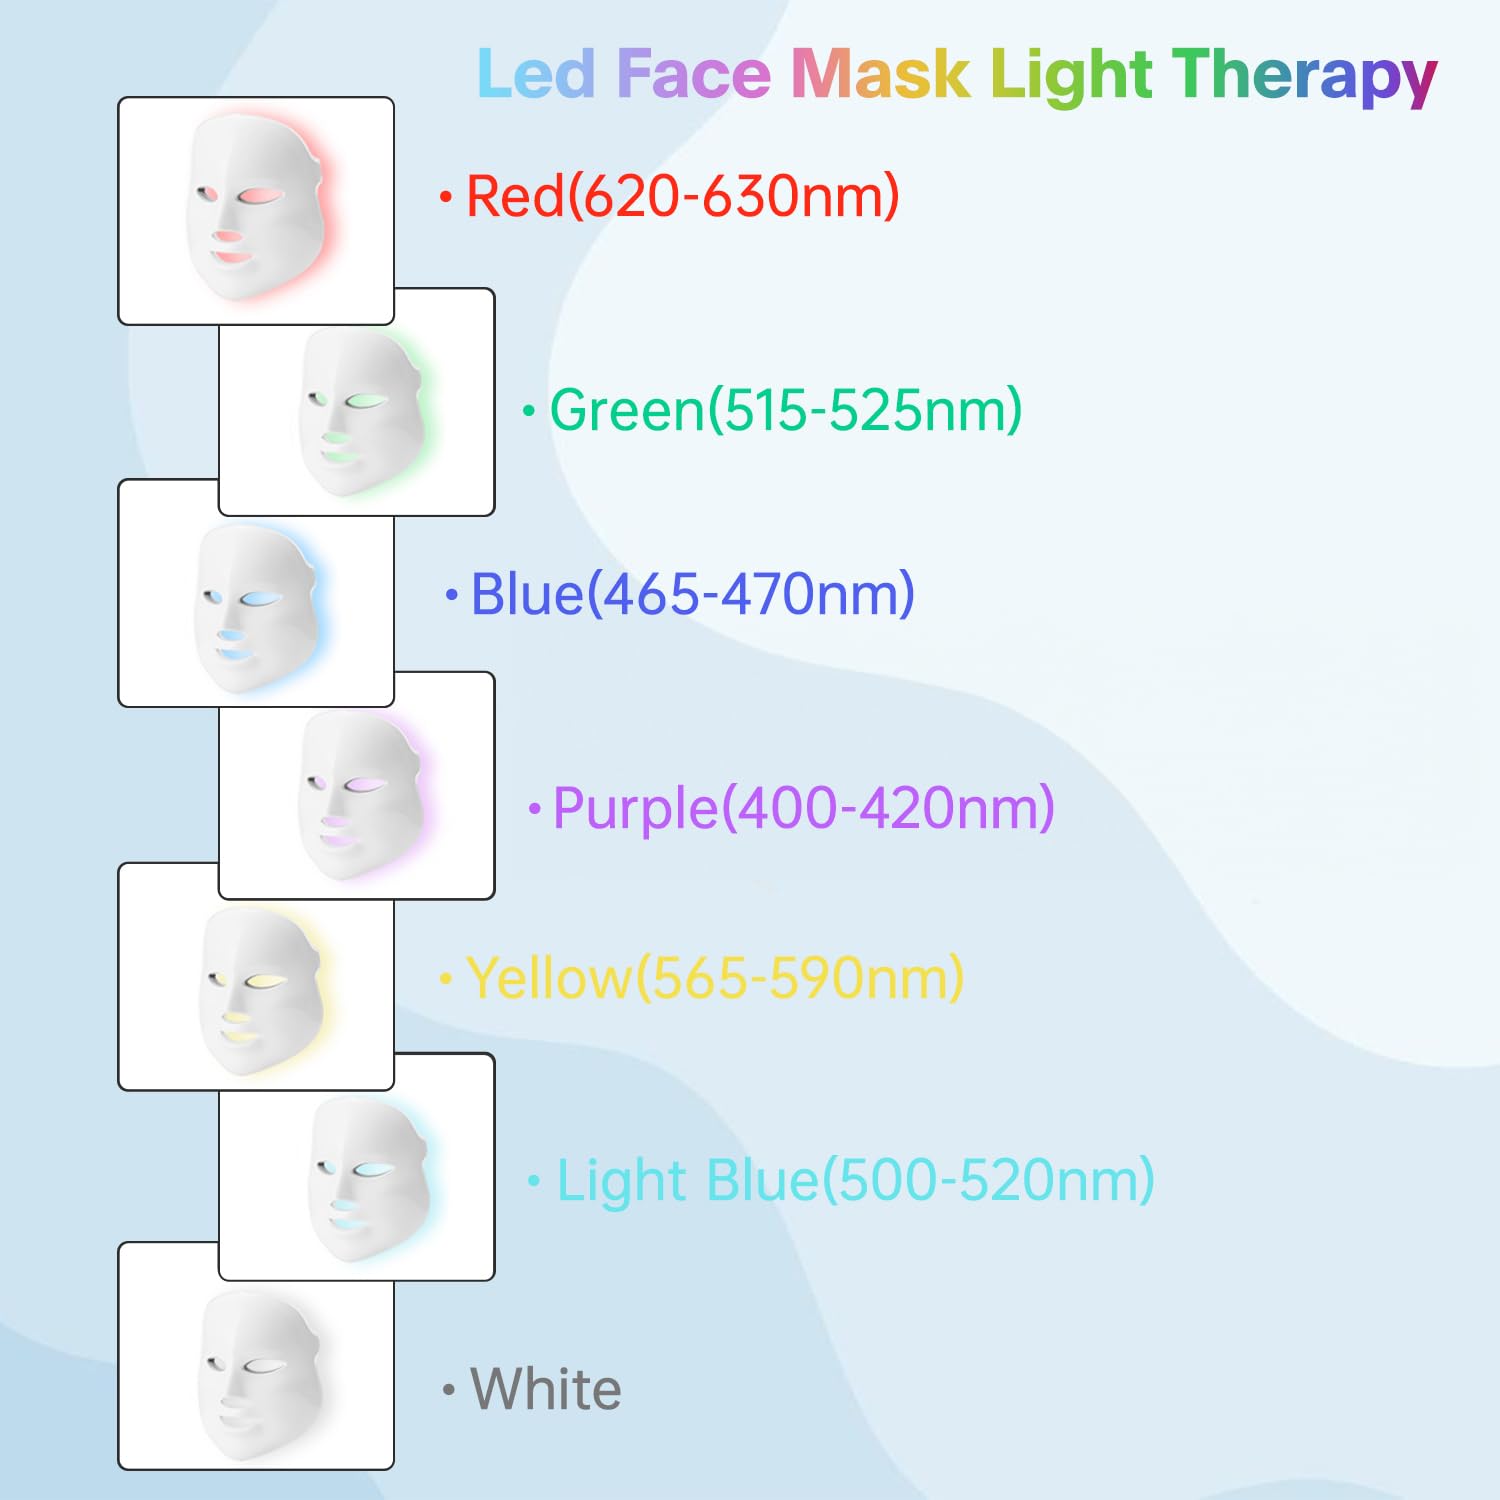 Fxtiaa Red Light Therapy for Face, Led Face Mask Light Therapy, 7-1 Colors LED Facial Skin Care Mask